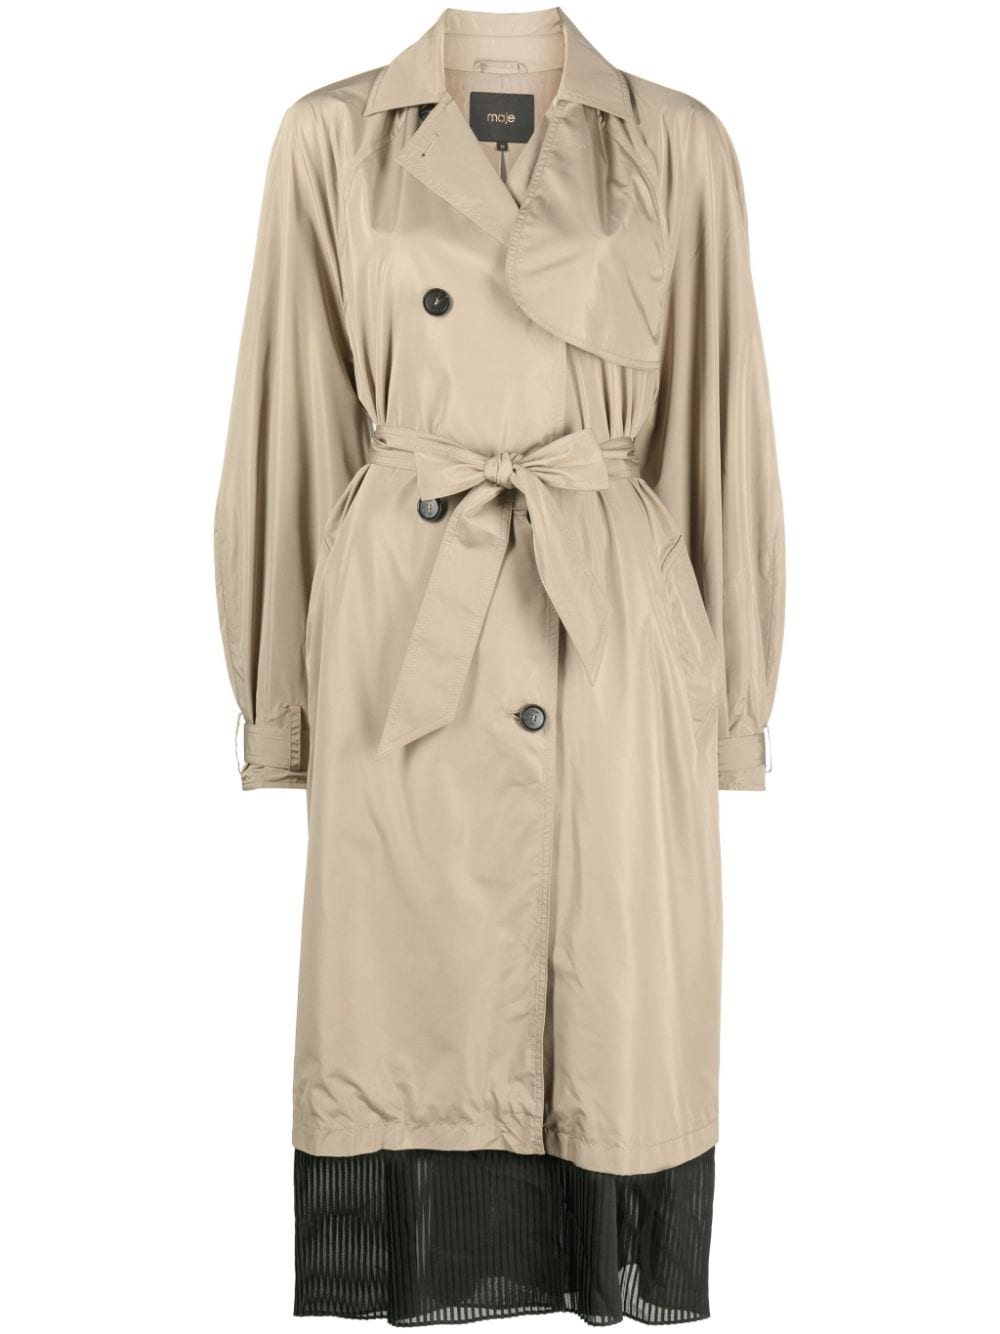 Maje double-breasted trench coat - Neutrals von Maje